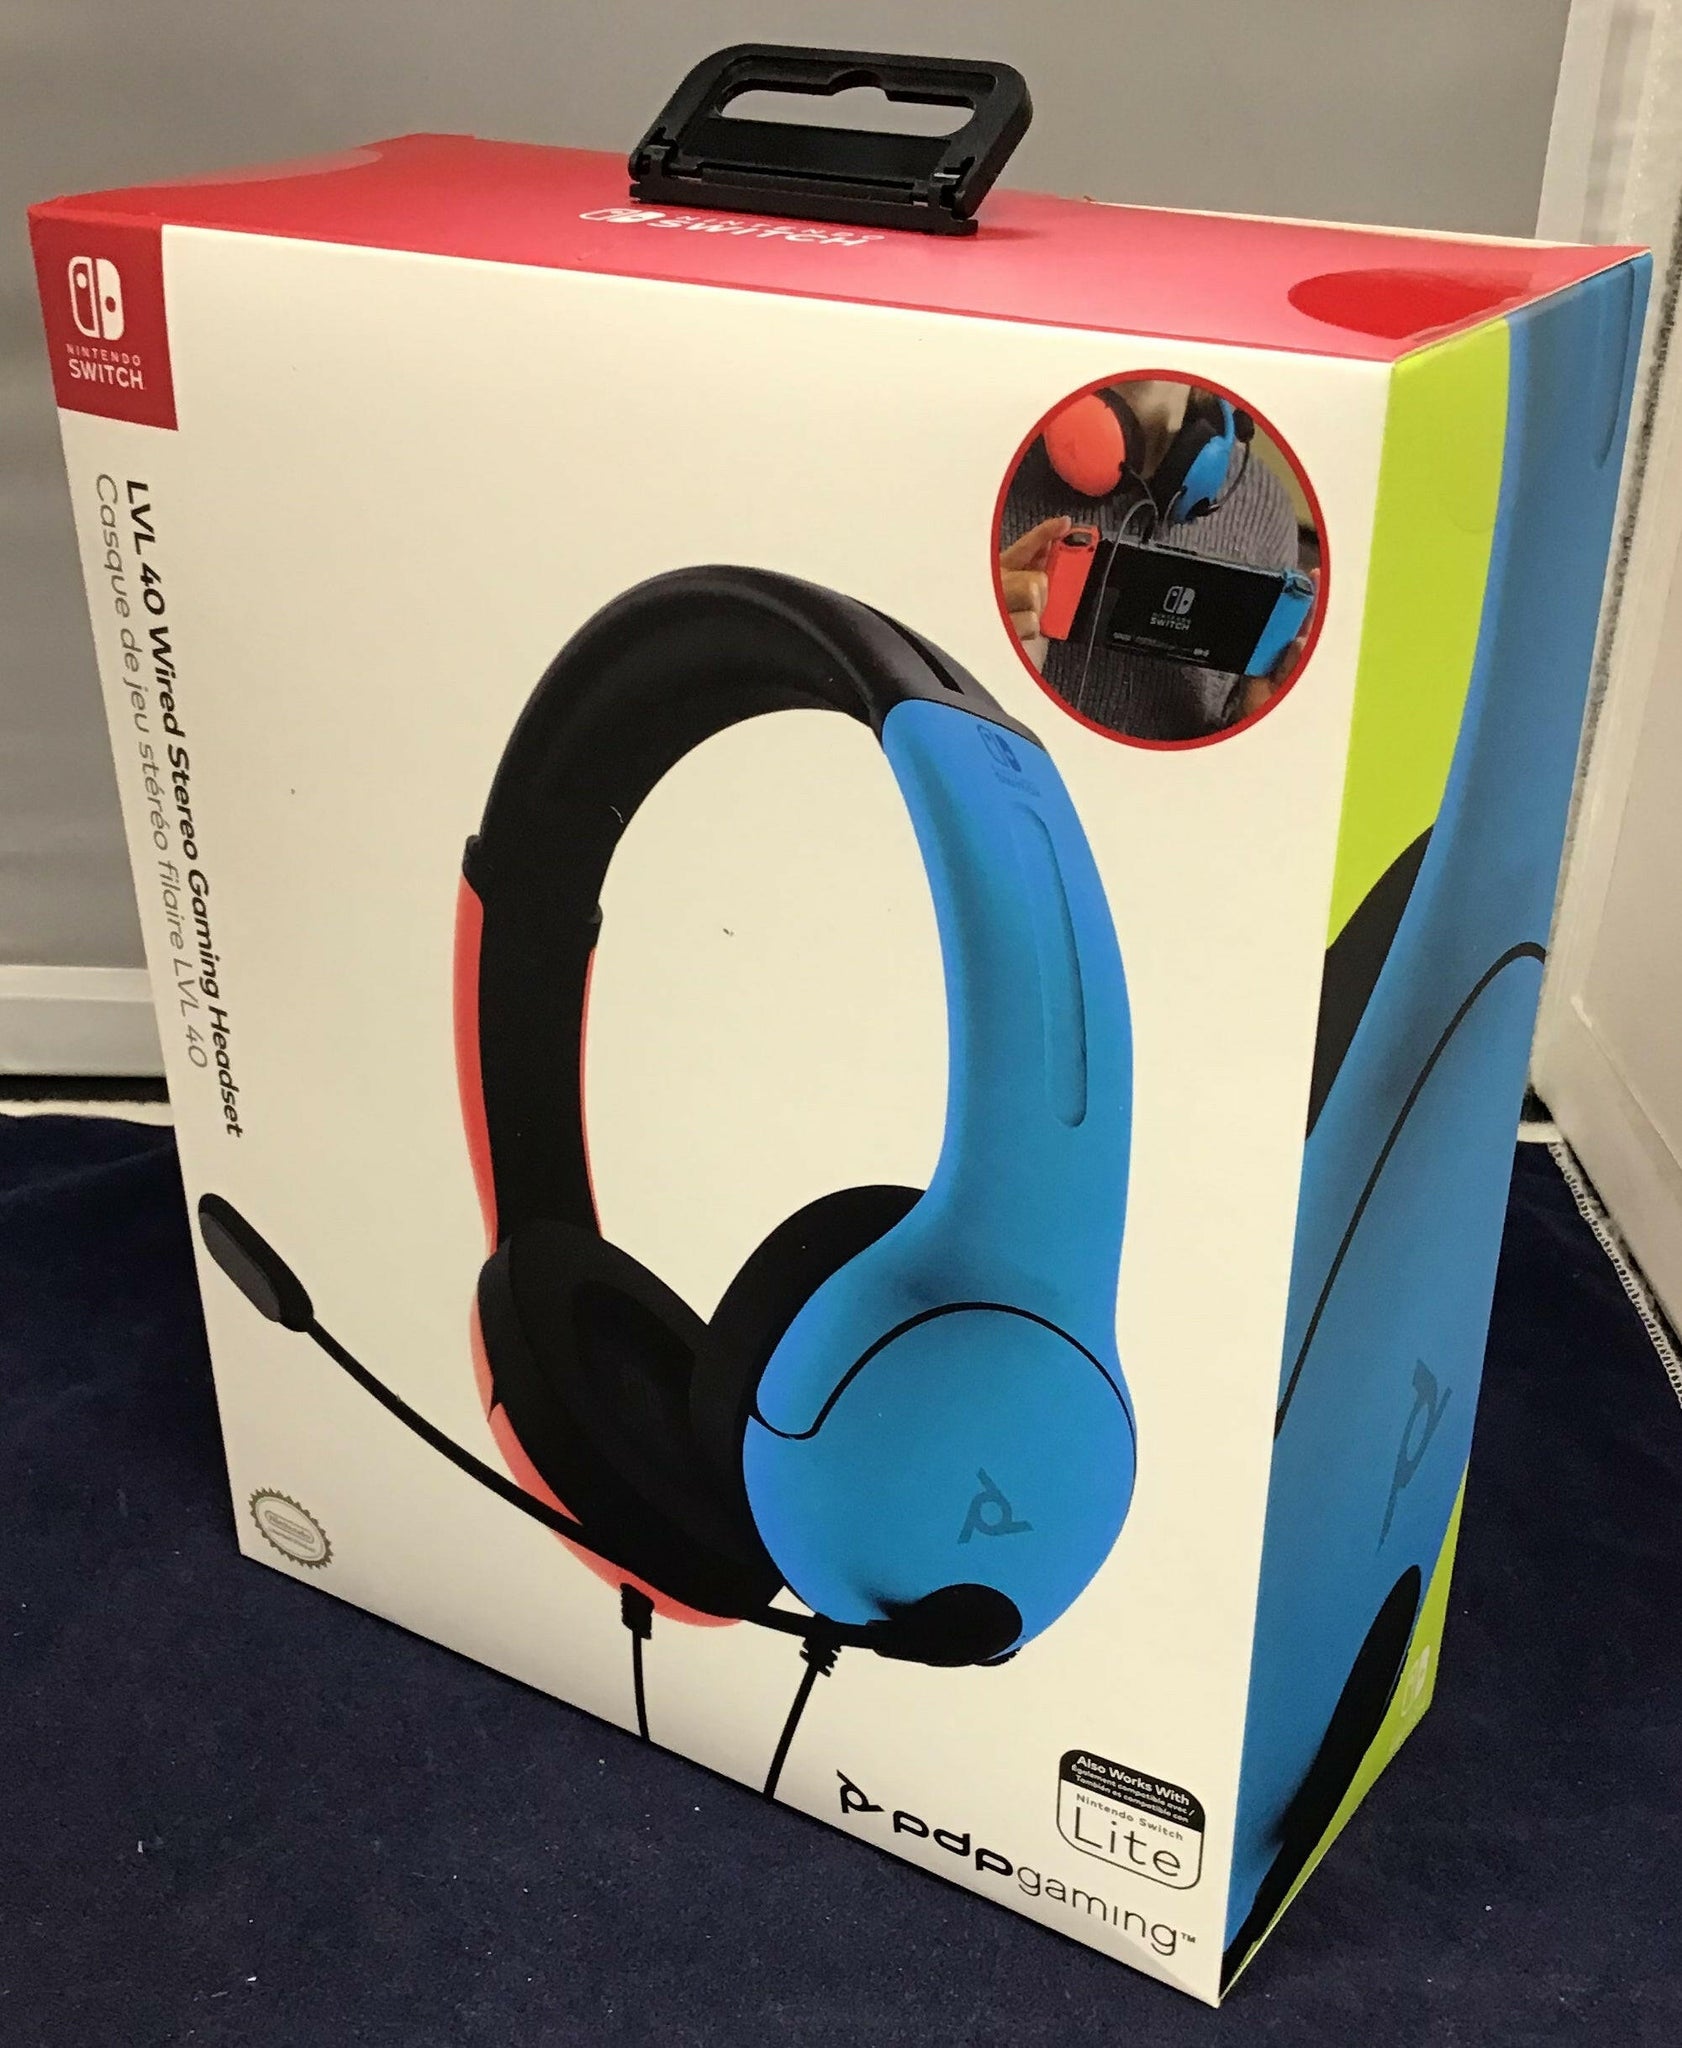 LVL40 Wired Stereo Gaming Headset - Blue/Red